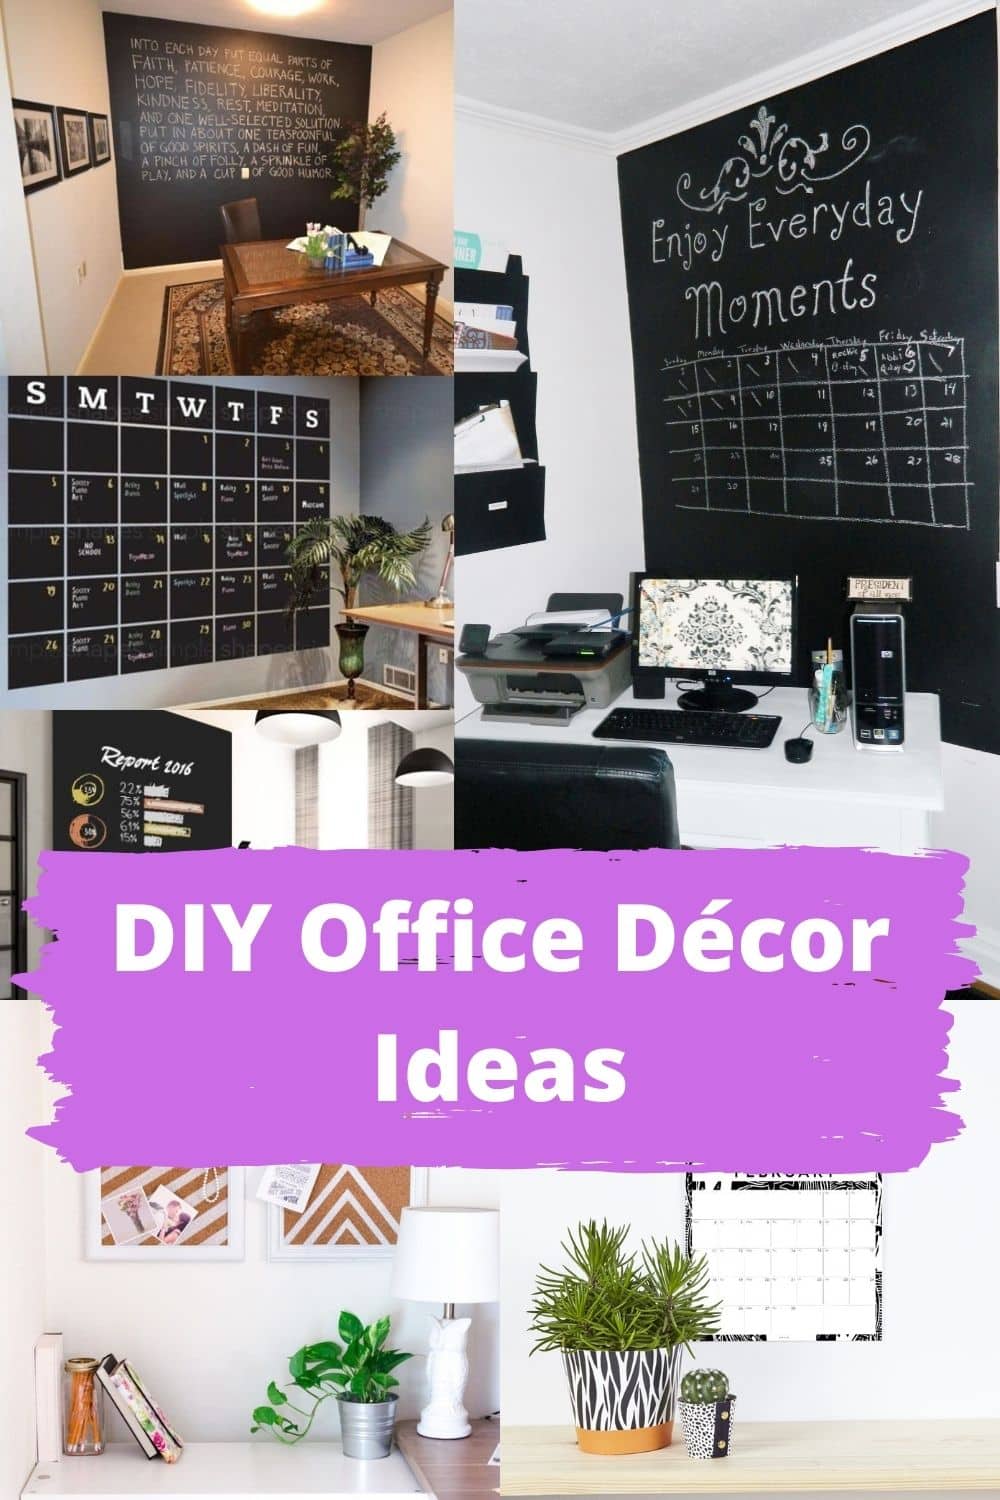 20 Home Office Wall Decor Ideas for a Creative Space | Blog | Square Signs